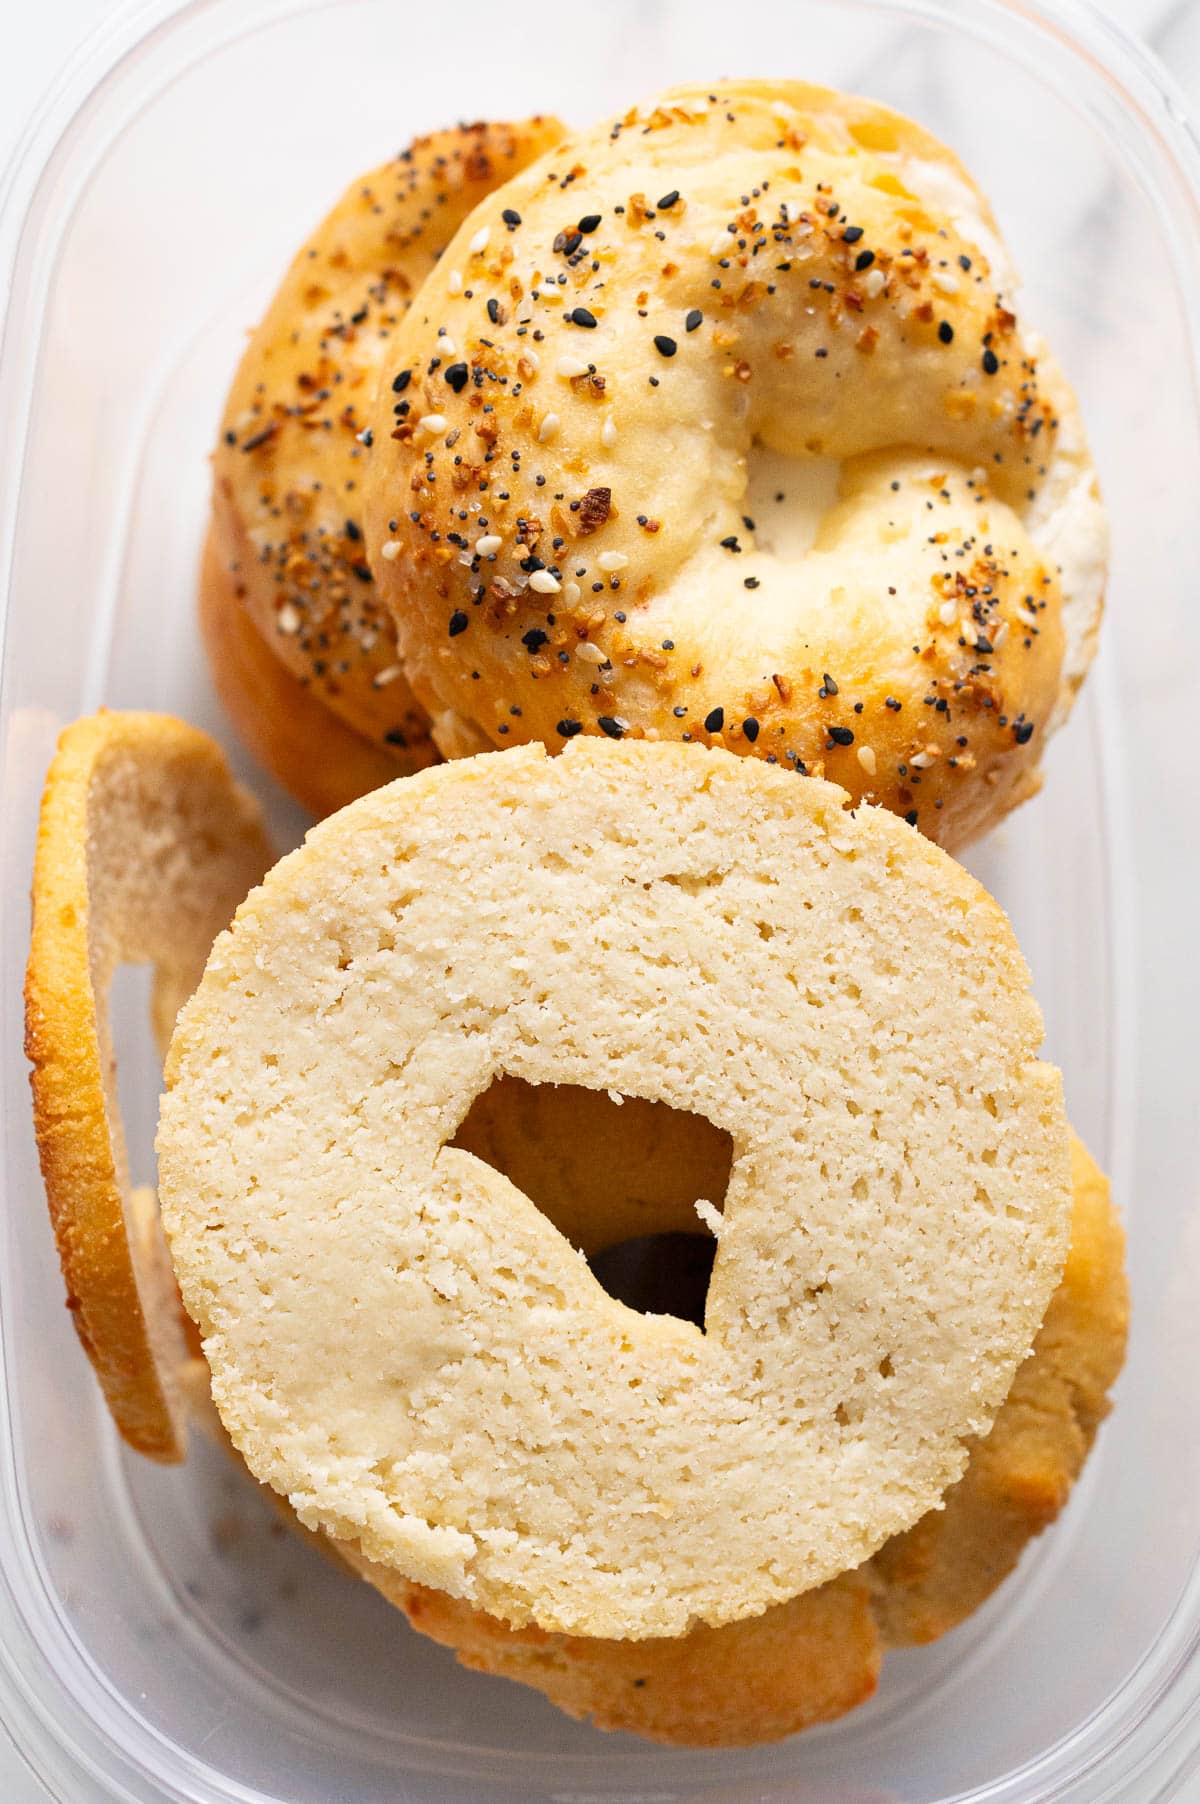 Sliced in half bagel in container with other bagels.